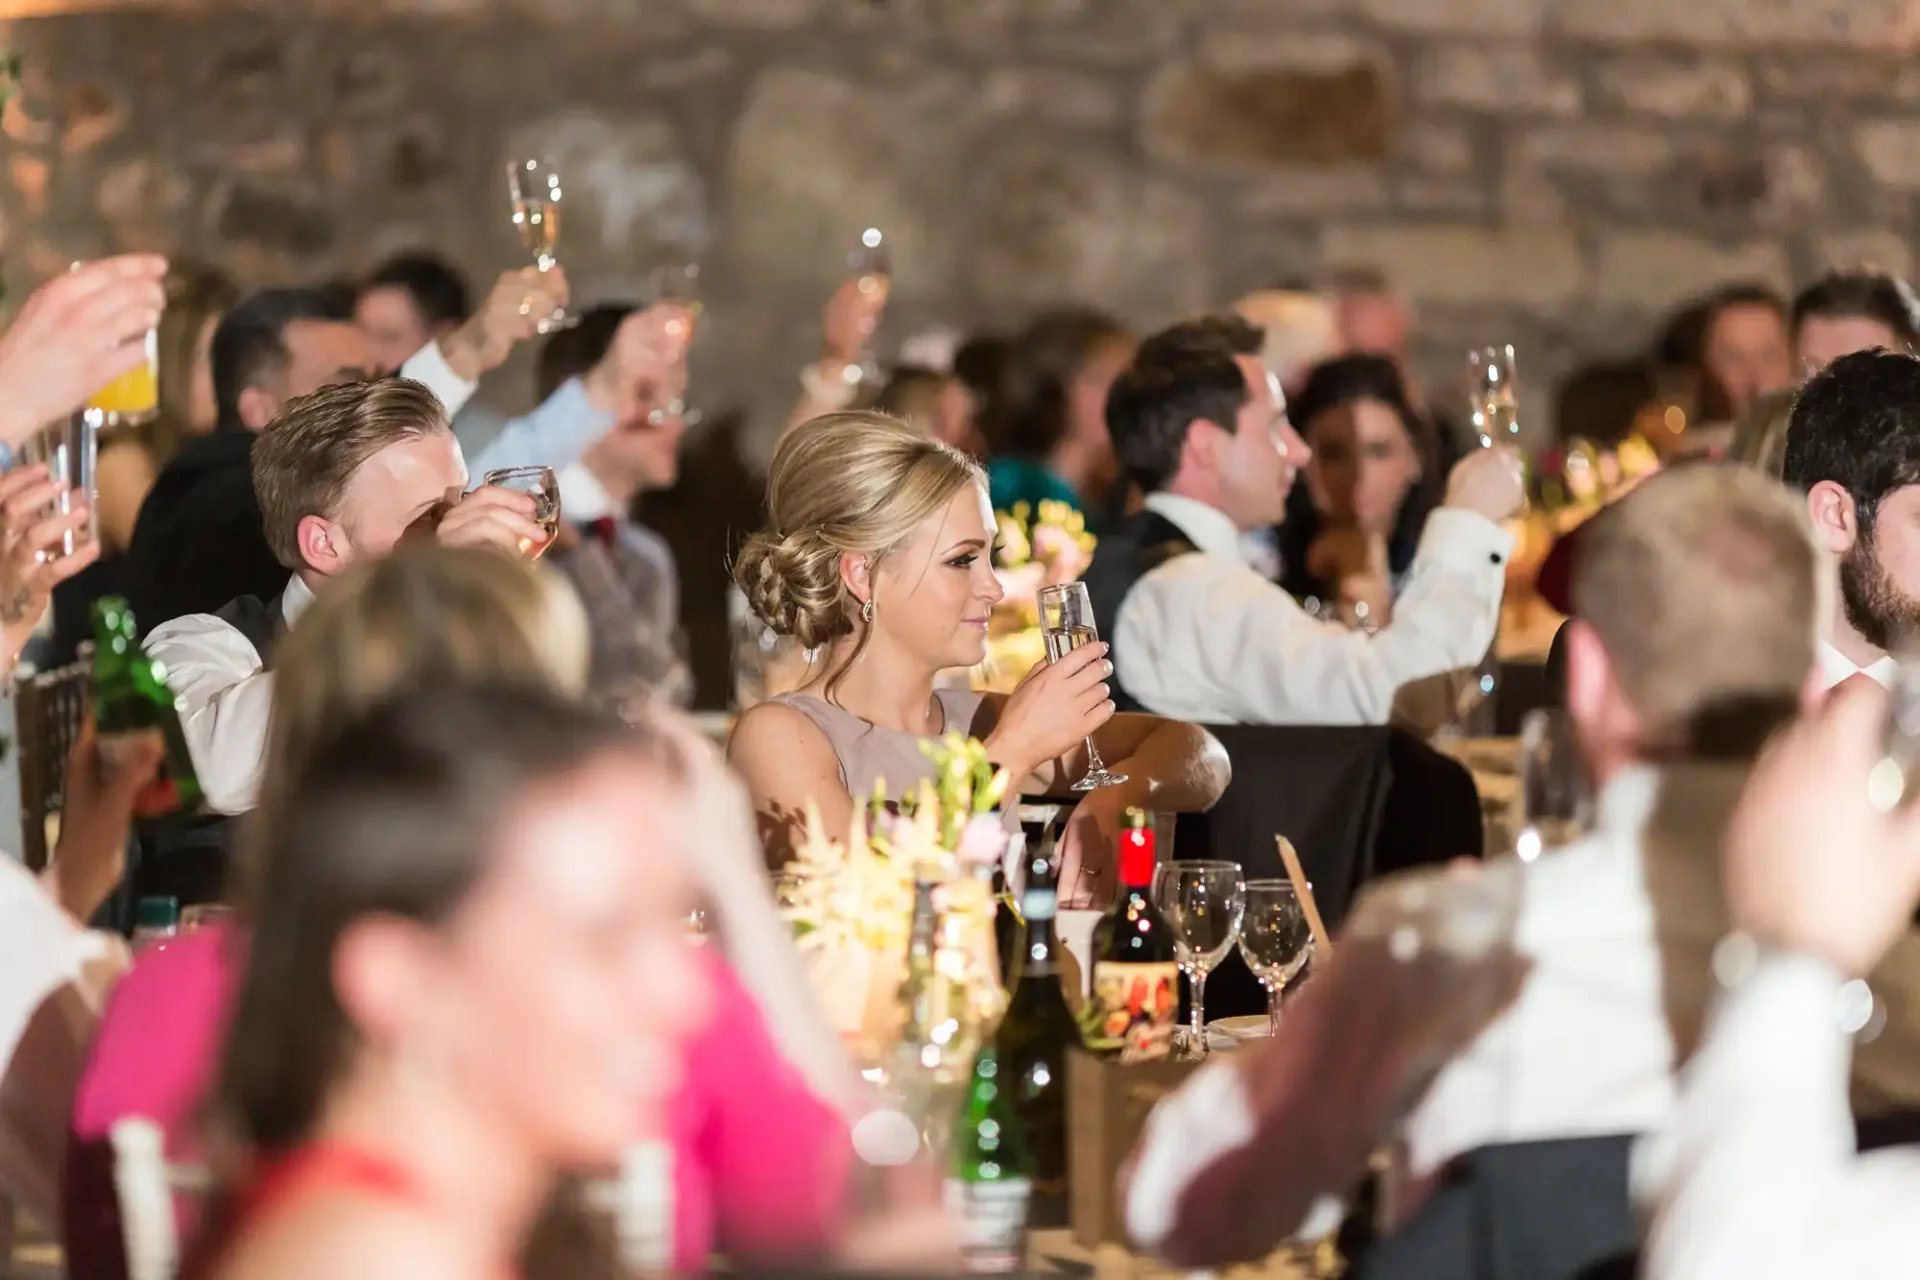 Guests raising glasses for a toast at a candlelit wedding reception inside a stone-walled venue.